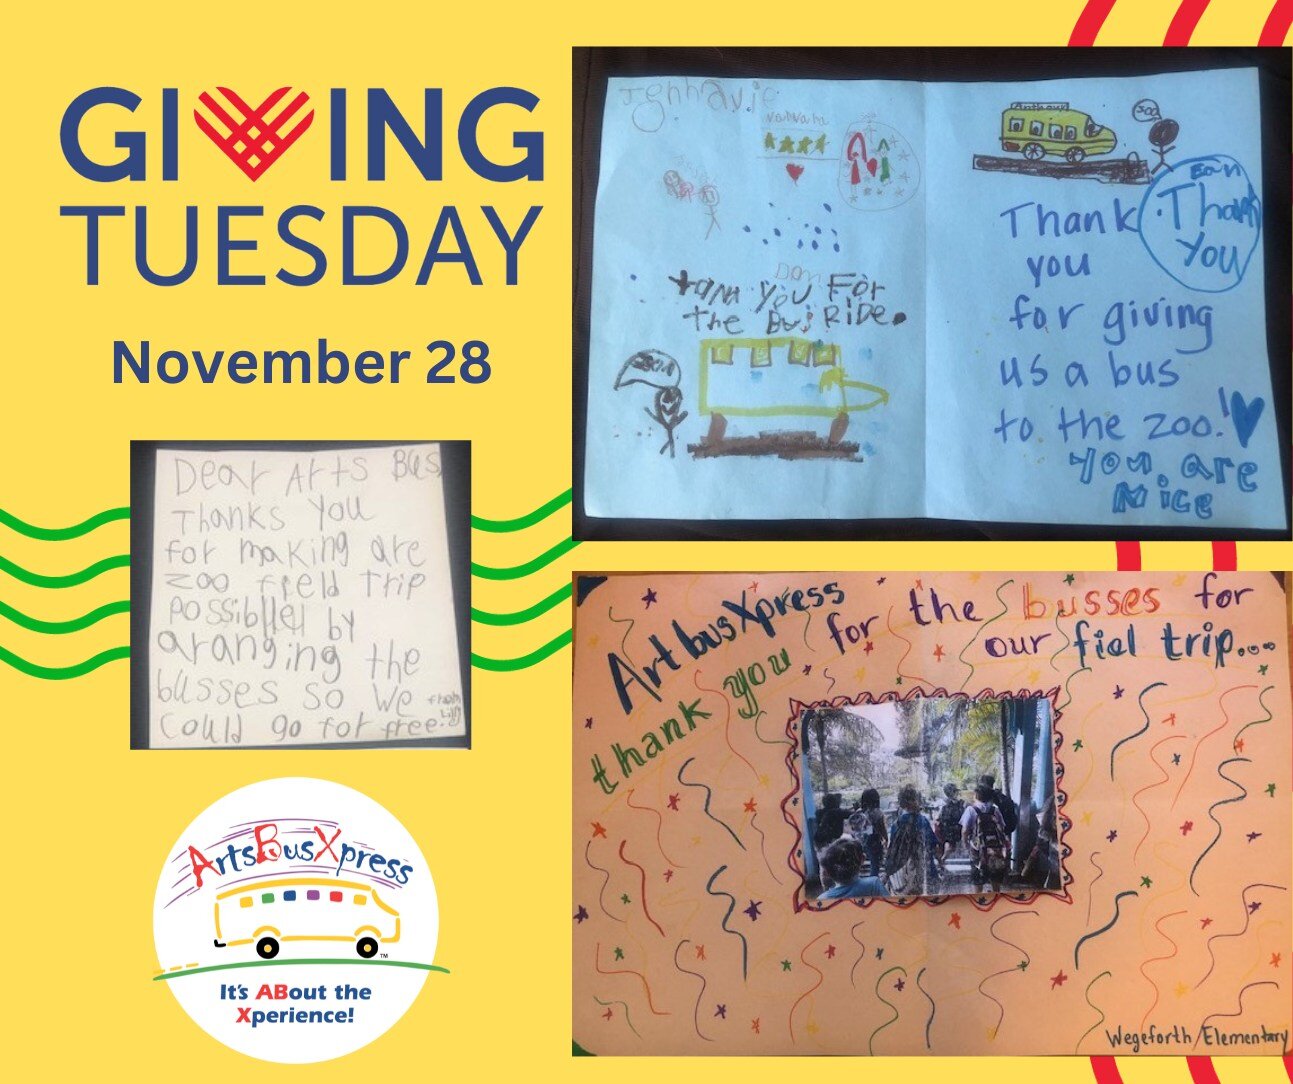 Giving Tuesday is about finding that &lsquo;cause&rsquo; that speaks to you. For us, it&rsquo;s about sharing the opportunity to learn the deep history within San Diego museums, science centers, theaters, and so much more. It&rsquo;s a chance for und